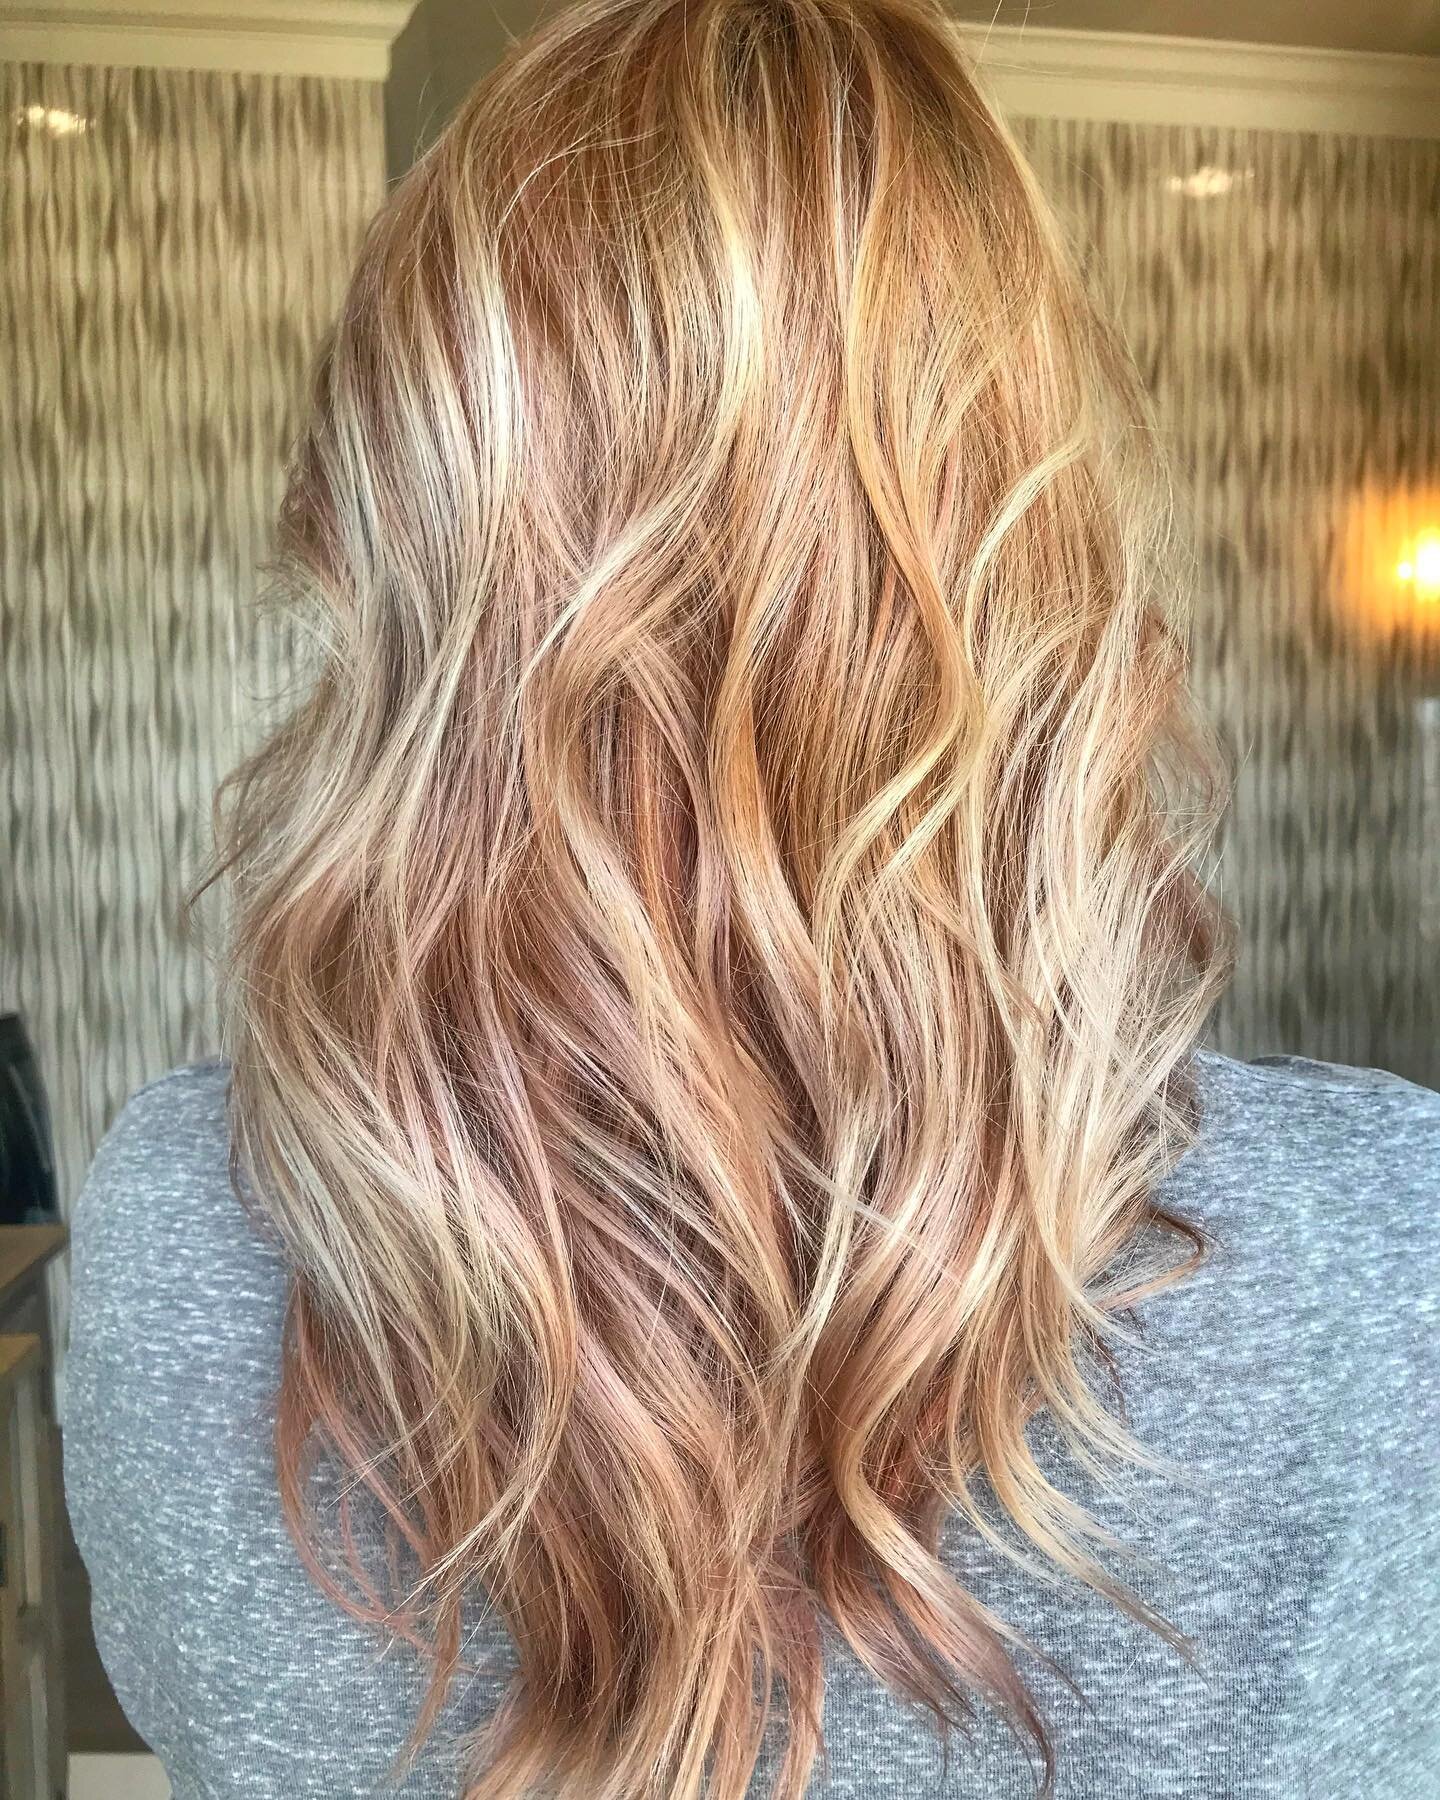 Everything&rsquo;s coming up ROSE GOLD for this beauty🥂
#jessdoesmyhair #remedysalon #allentxhairstylist #allentxhairsalon #dfwhair #rosegoldhair #rosegold #cominguprosegold #longhair #beautifulblondehair #wedorosegoldright